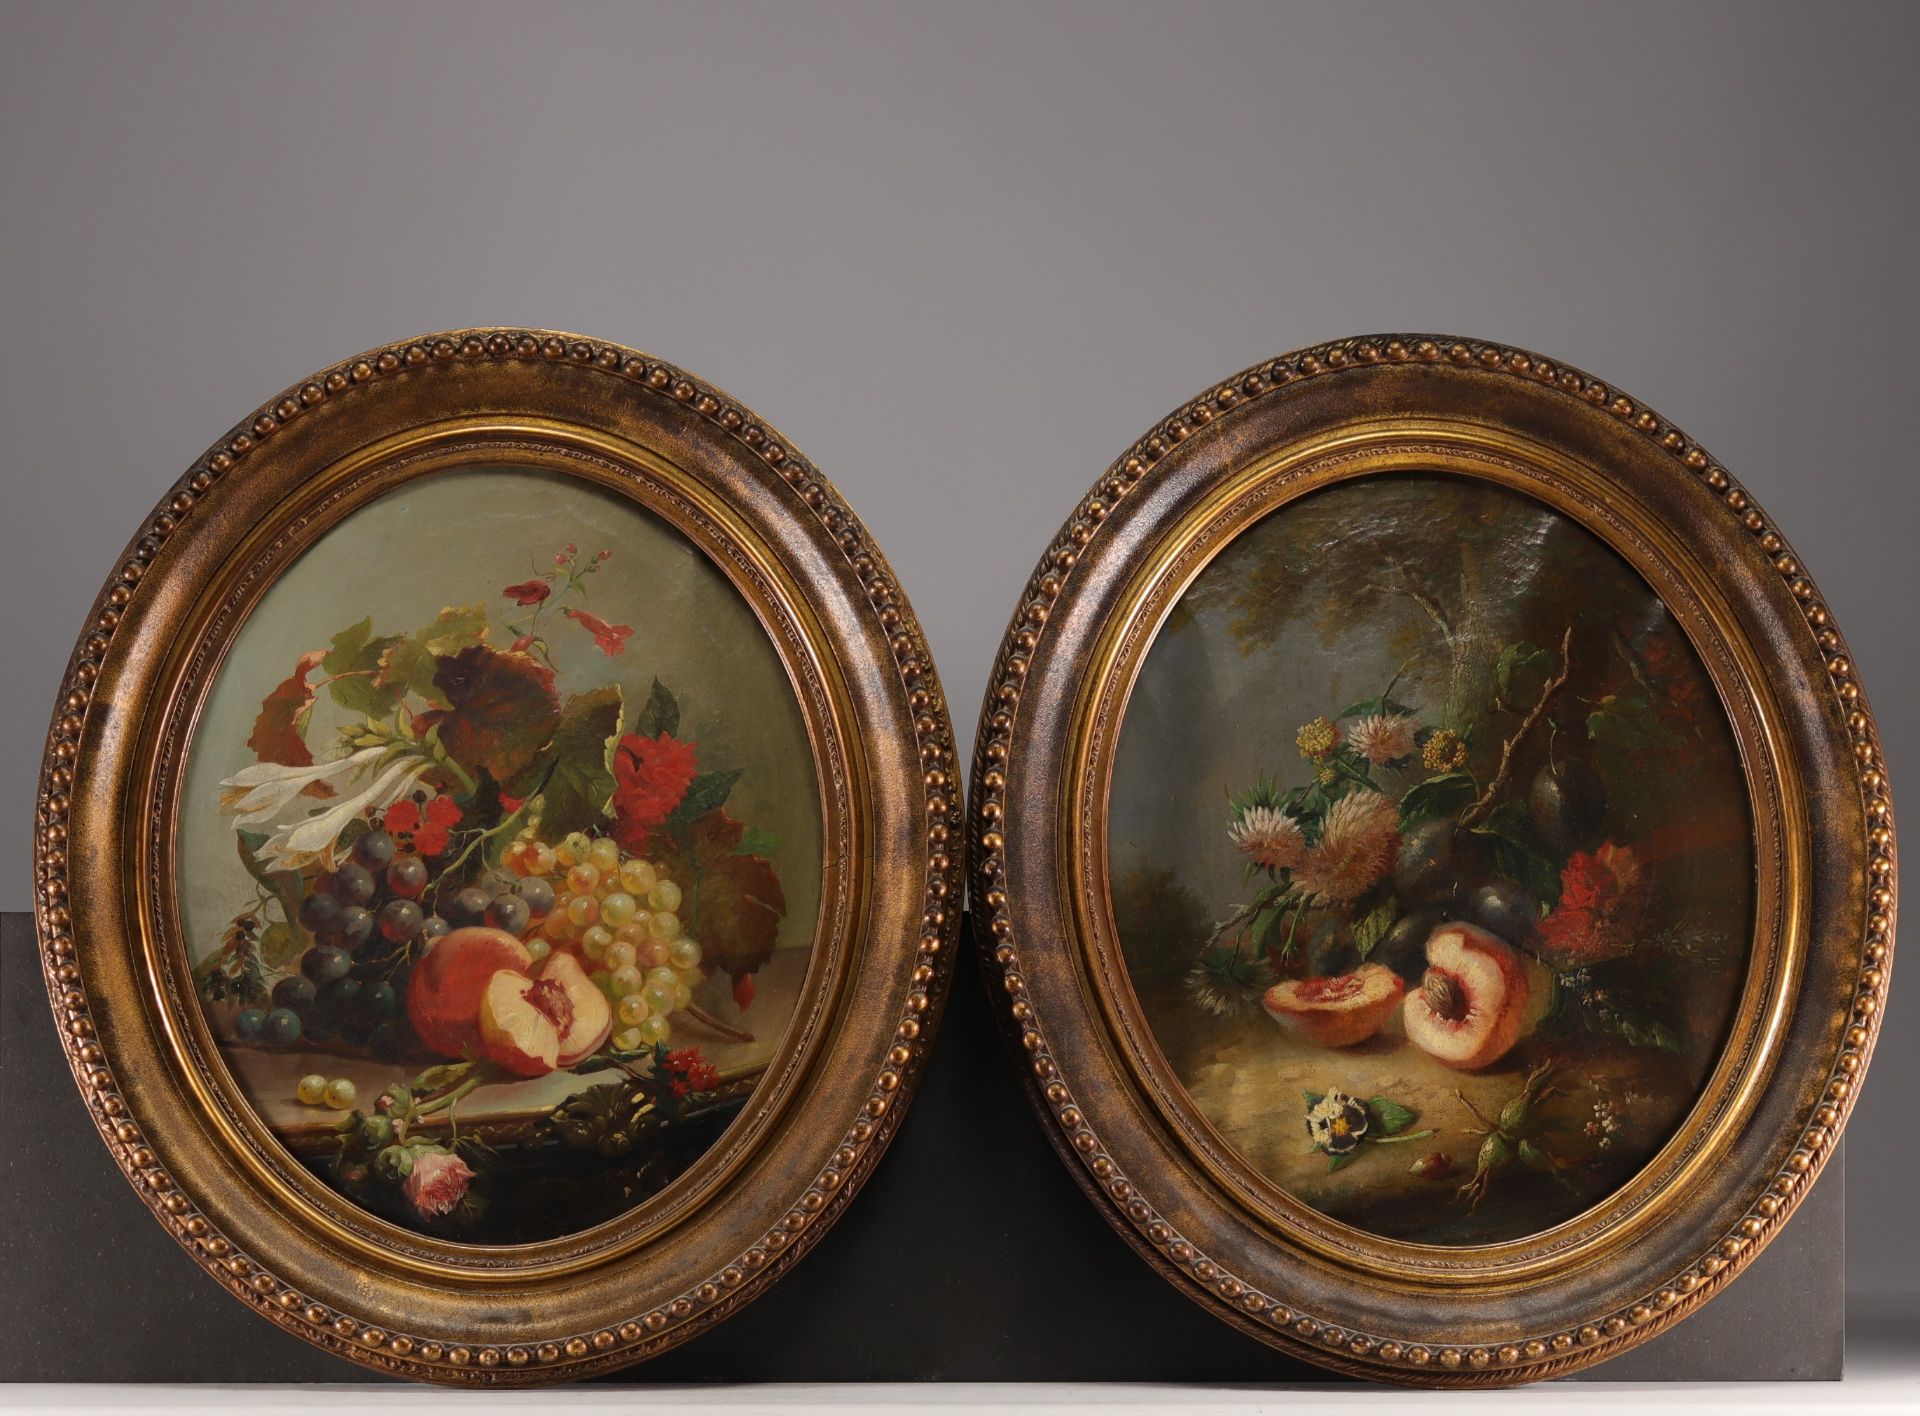 Pair of still lifes with fruit and flowers, oil on canvas, 19th century.